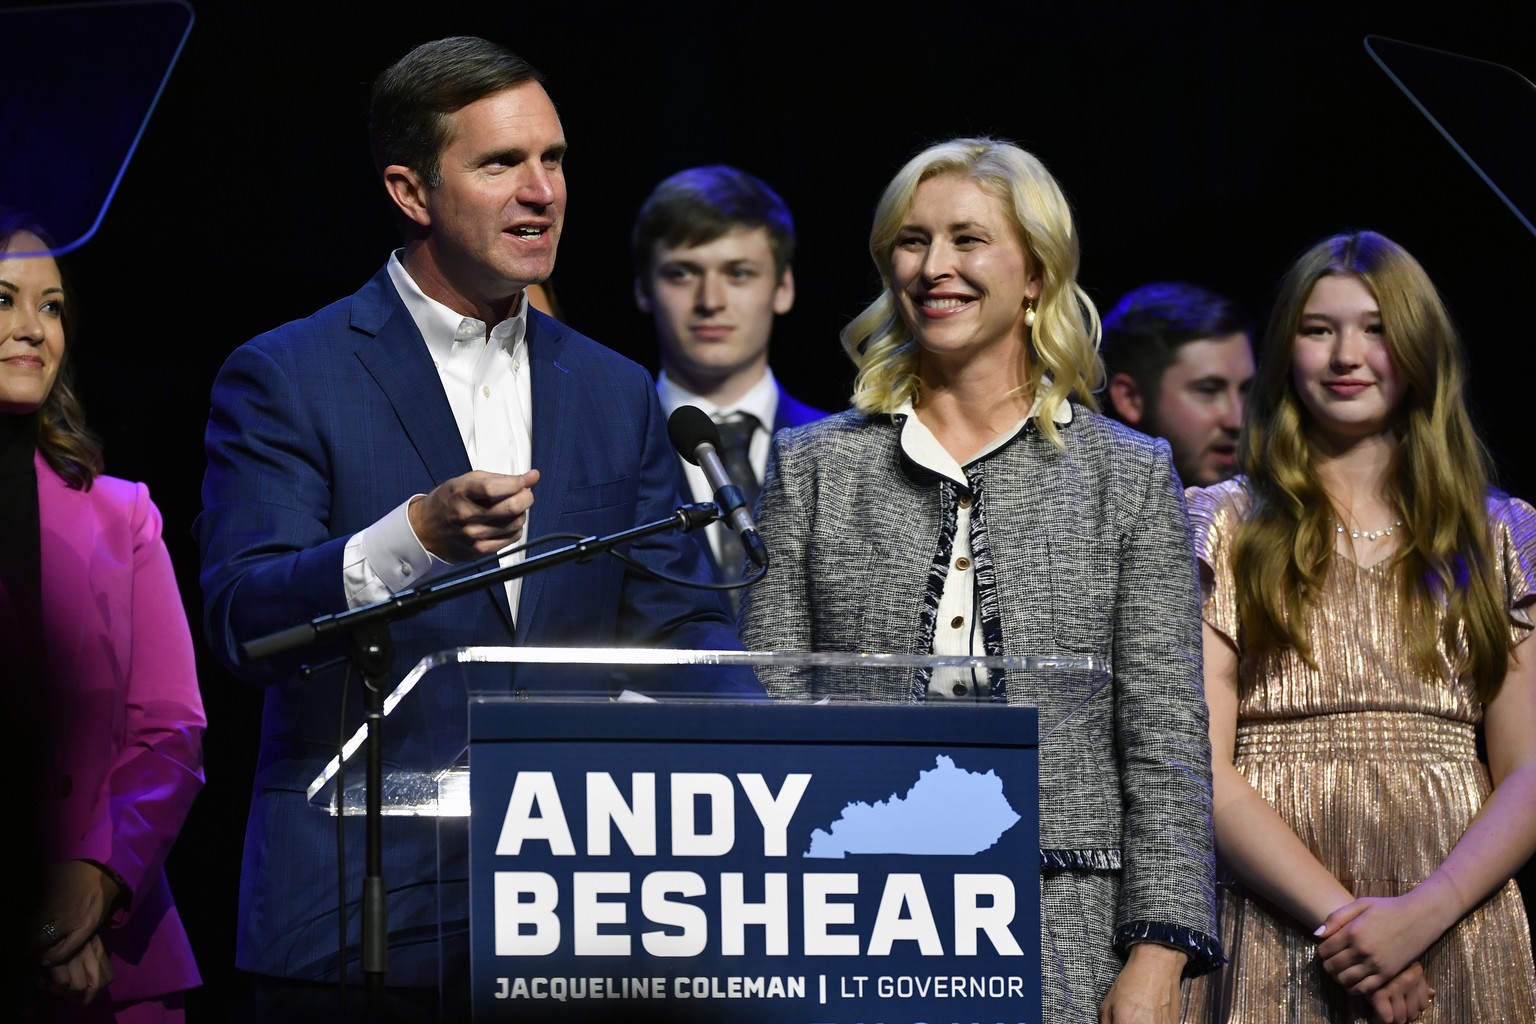 Kentucky Gov. Andy Beshear speaks during an election night rally after he was elected to a second term in Louisville, Ky., Tuesday, Nov. 7, 2023. At right is his wife Britiany Beshear. (AP Photo/Timot ...